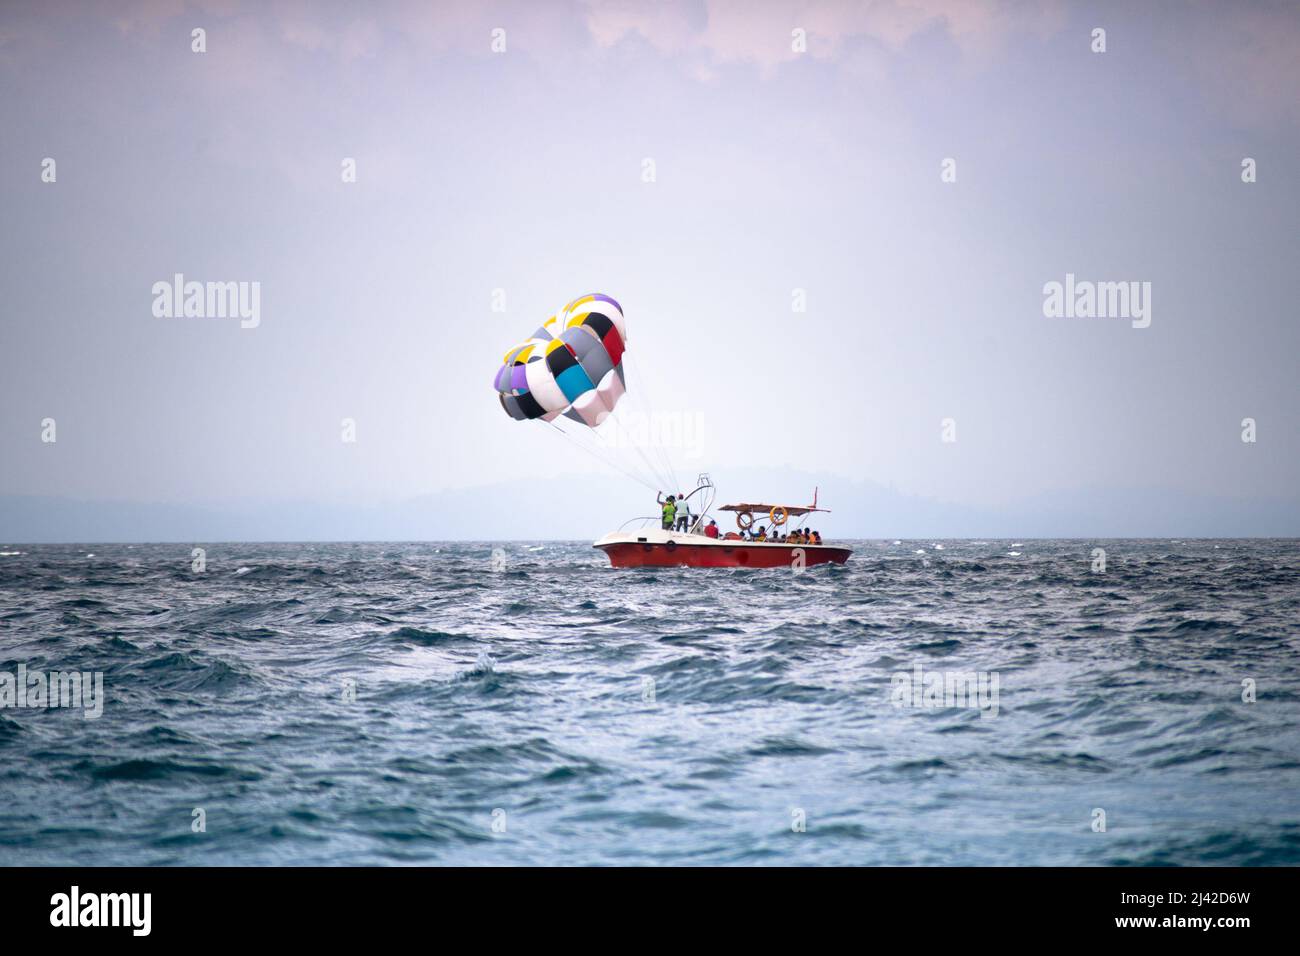 para gliding sailing behind power speed boat floating against cloudy sky at beach in havelock andaman nicobar island India showing adventure sports Stock Photo